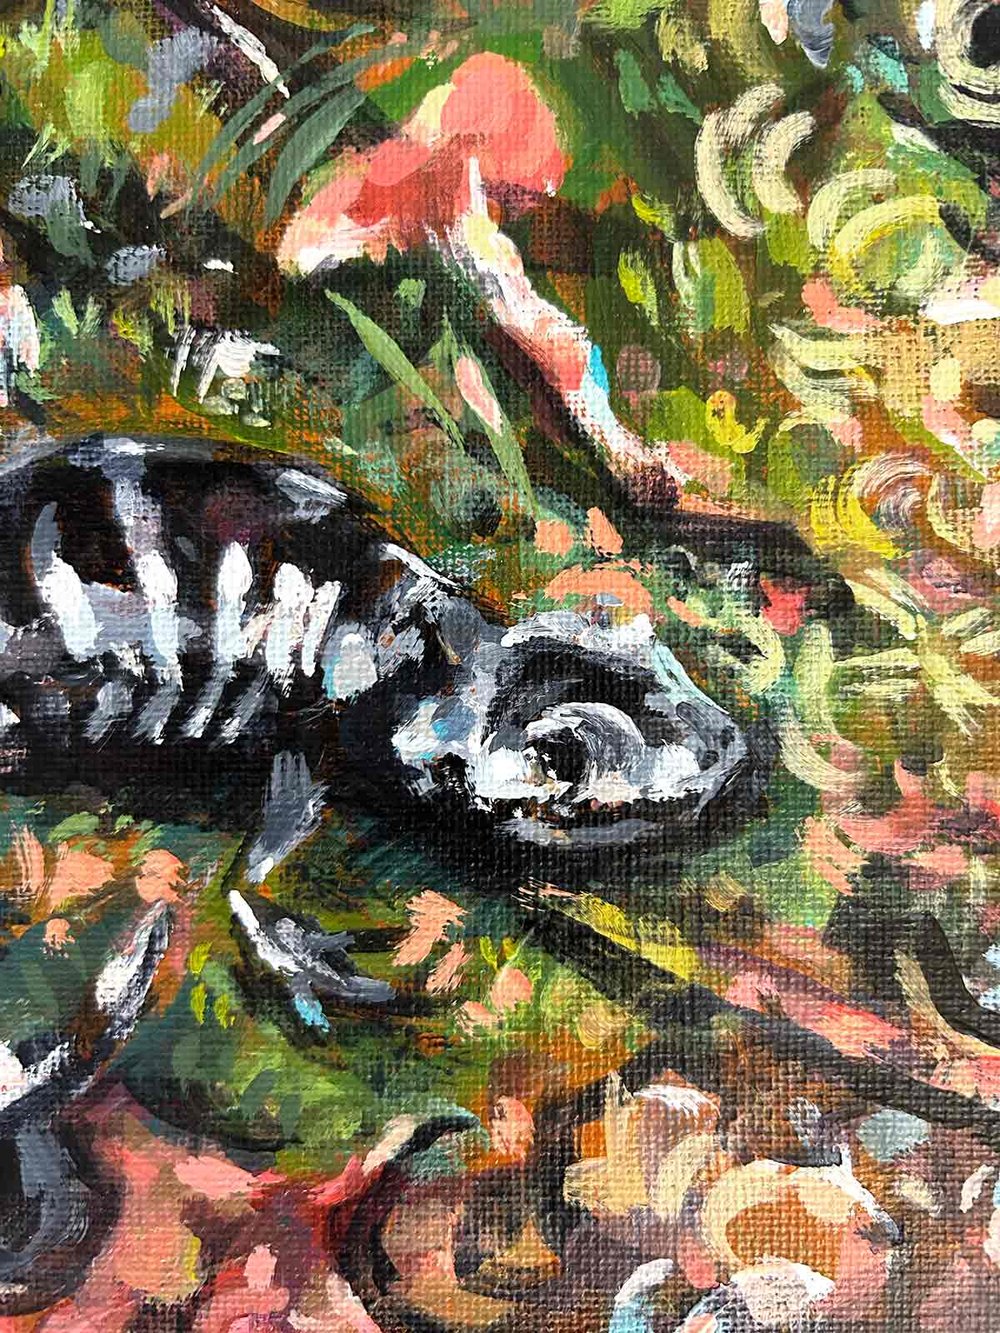 A Light Drizzle – Marbled Salamander painting